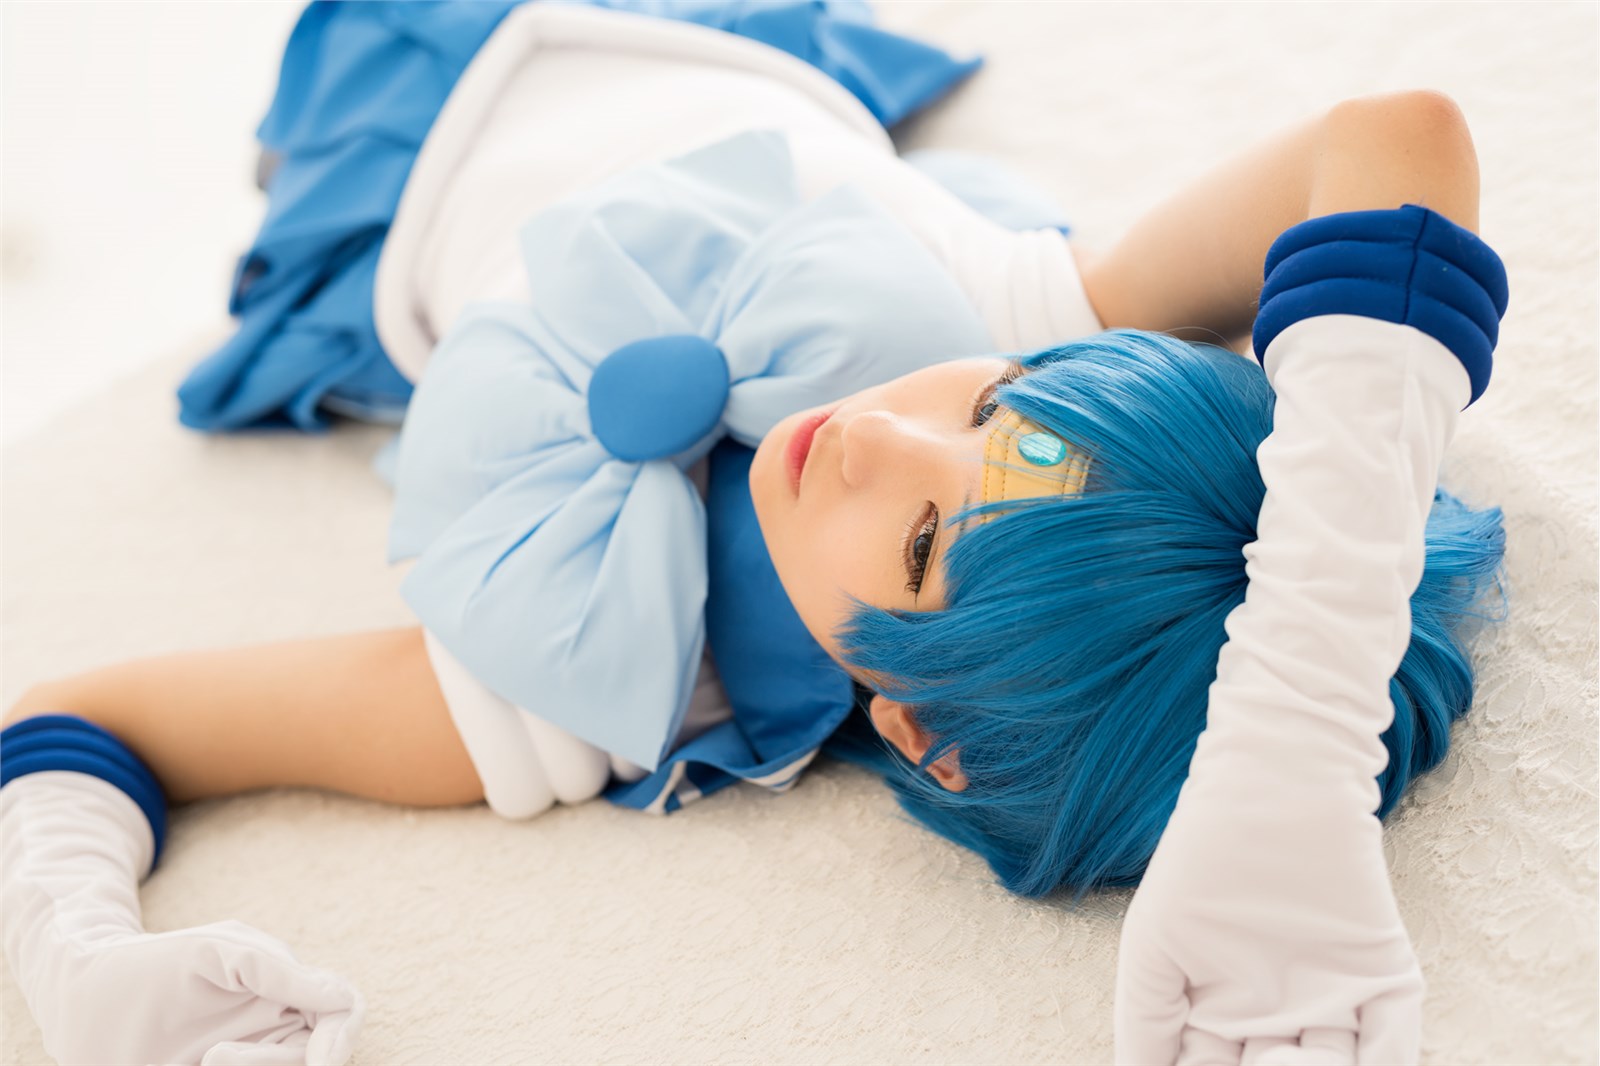 Sapphire student sister Cosplay photo 2(17)